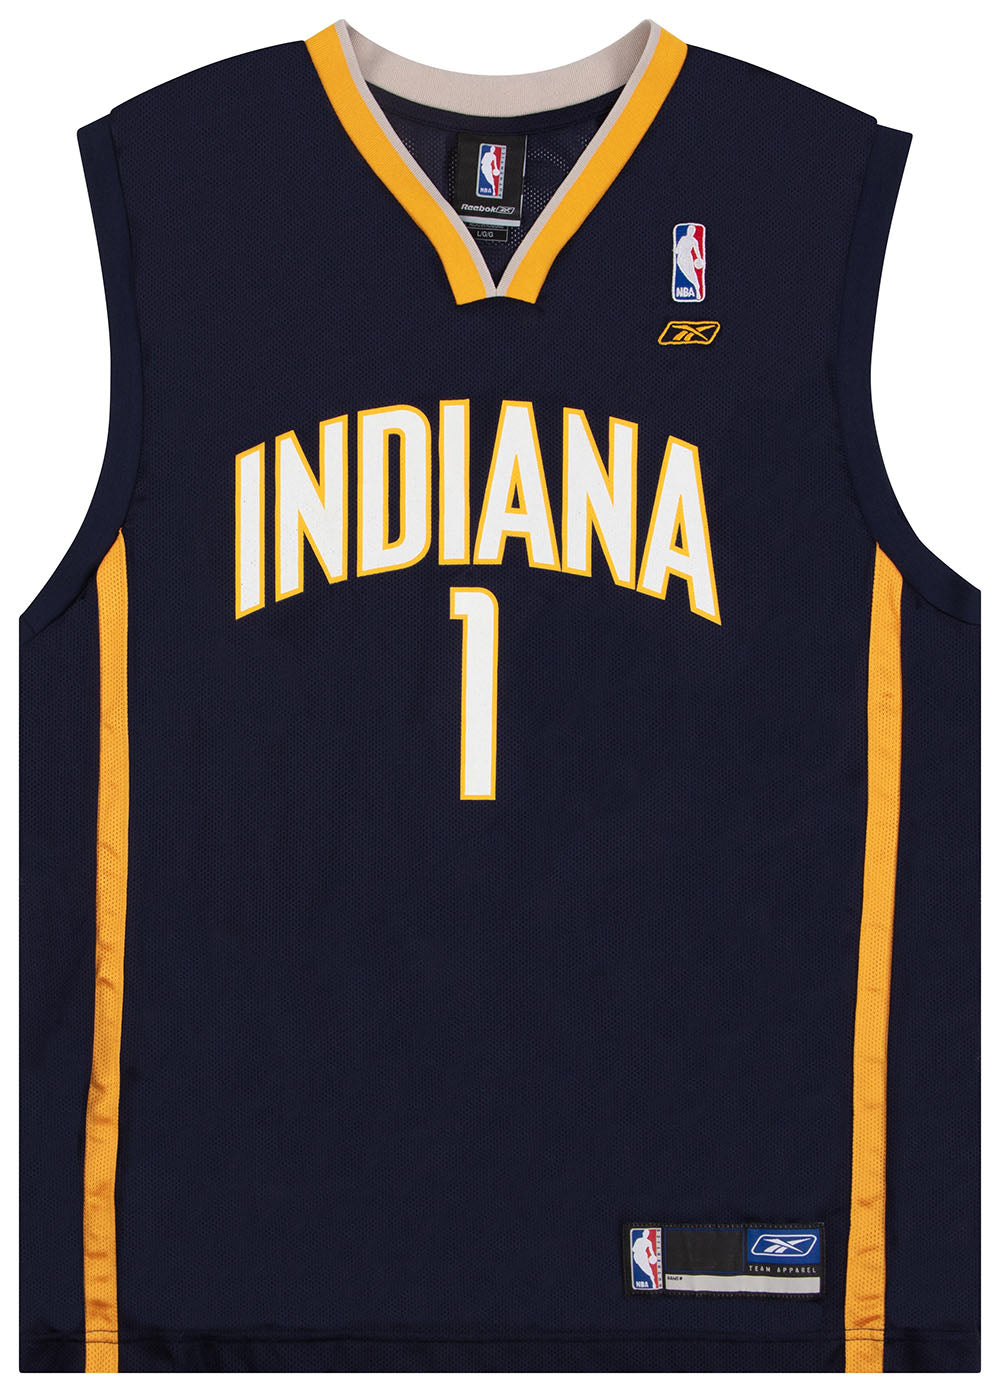 Indiana Pacers 2003-2004 Throwback Jersey